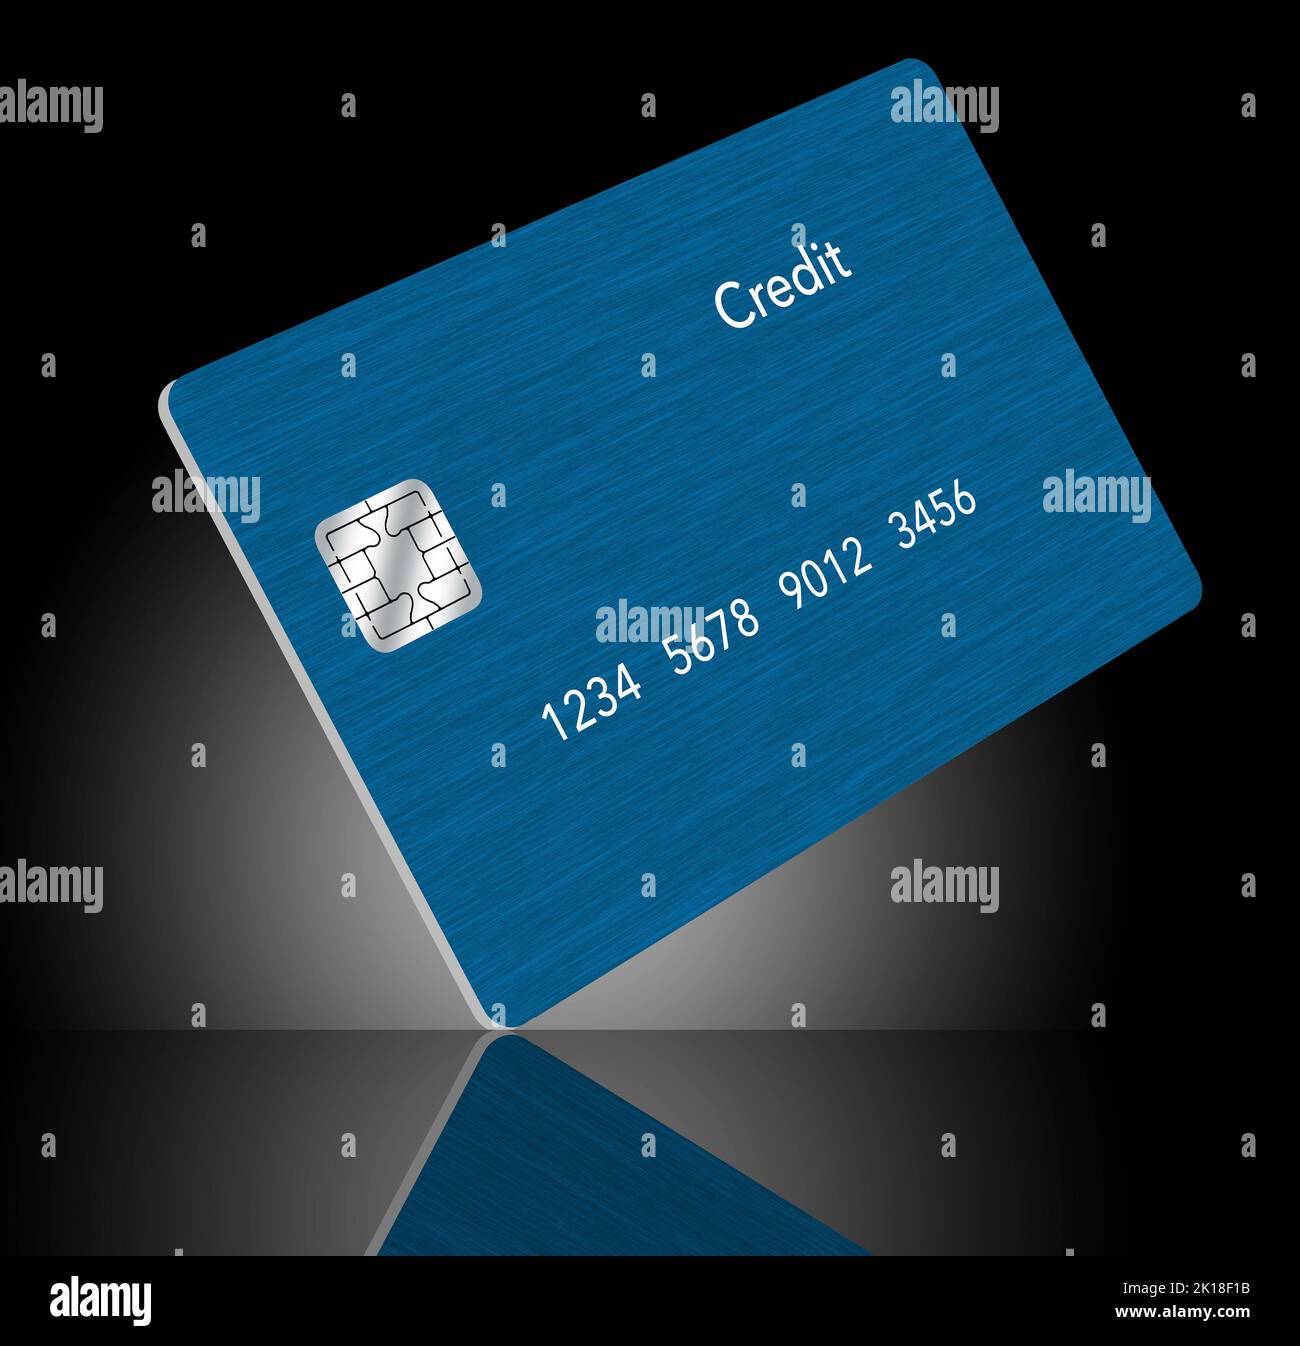 A blue generic credit card is seen reflected in a polished surface in this 3-d illustration. Stock Photo